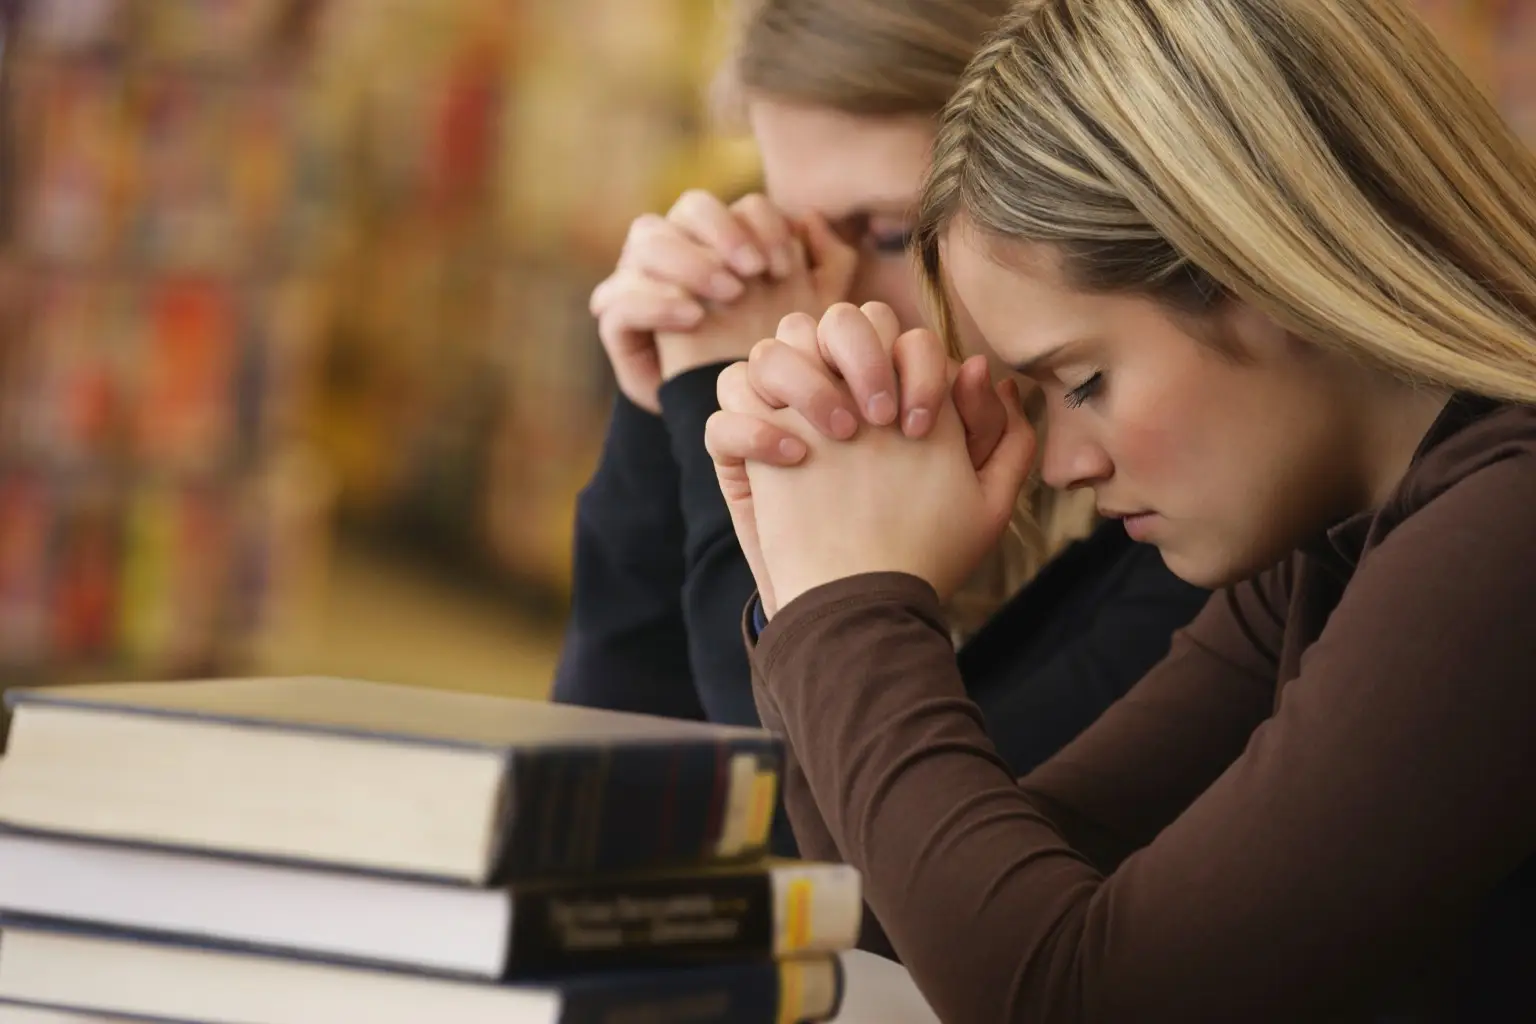 How to Keep Your Sanity as a Religious College Student